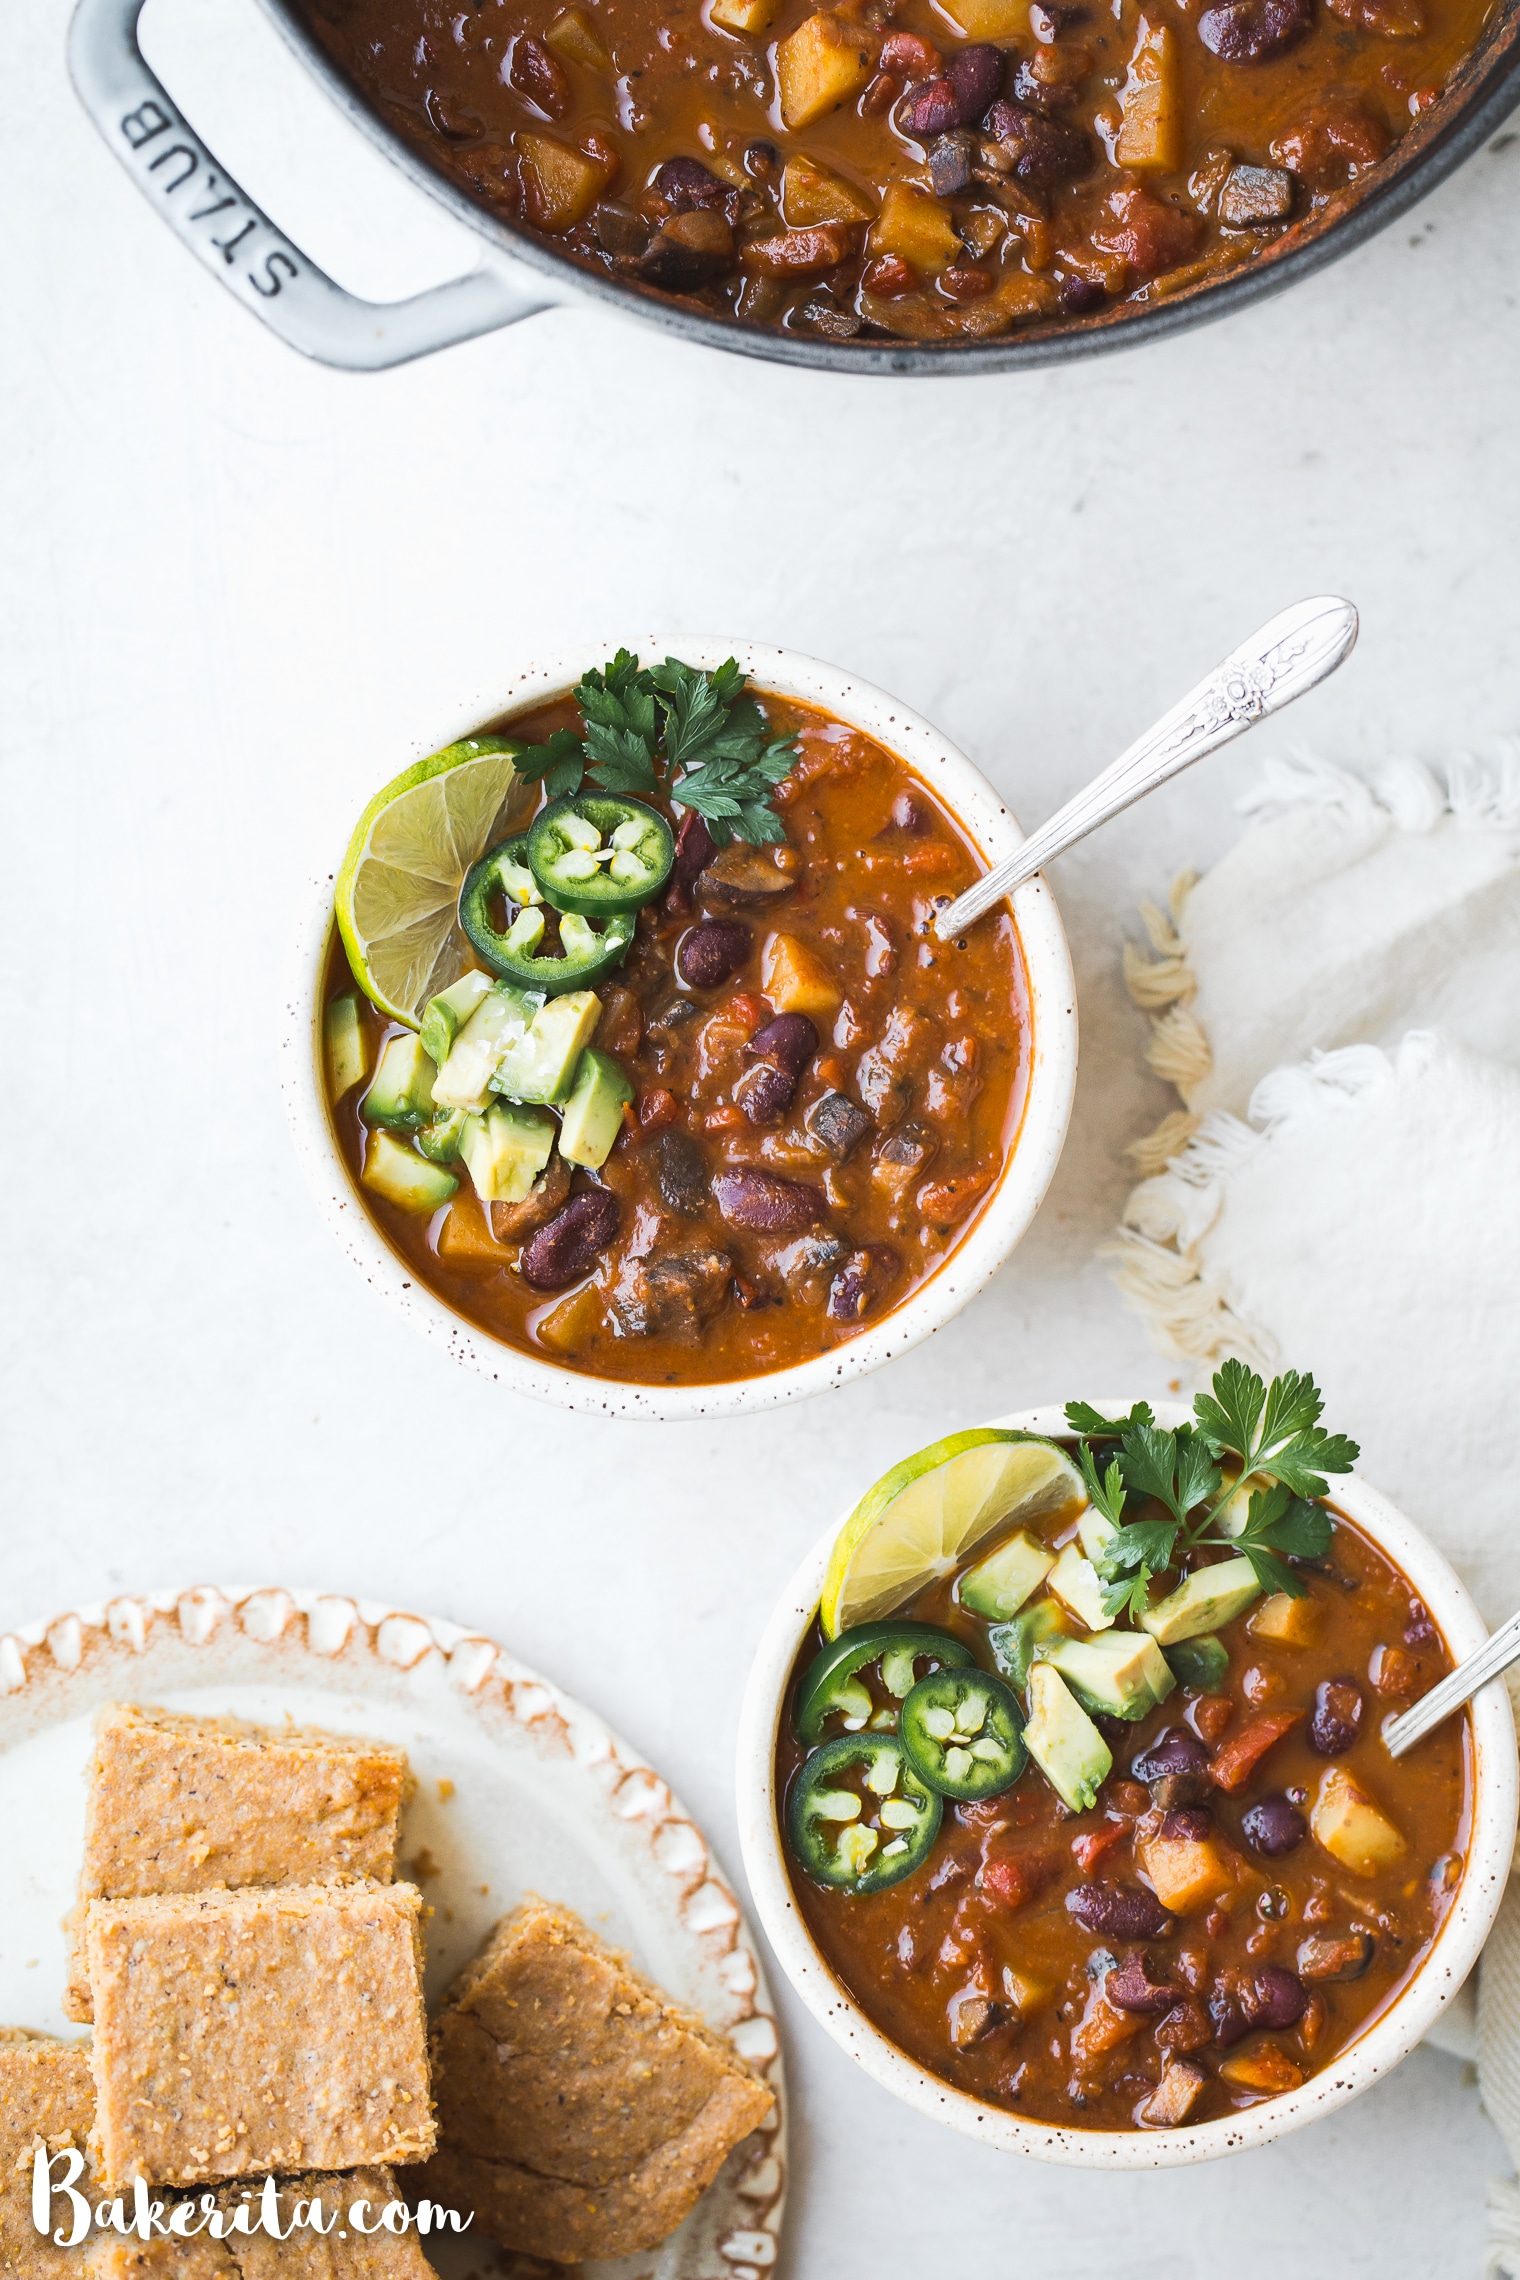 This Vegan Chili doesn't lack any heartiness just because it doesn't have any meat. It's loaded up with veggies, beans, and tons of spices -- this is the BEST vegan chili recipe I've had!